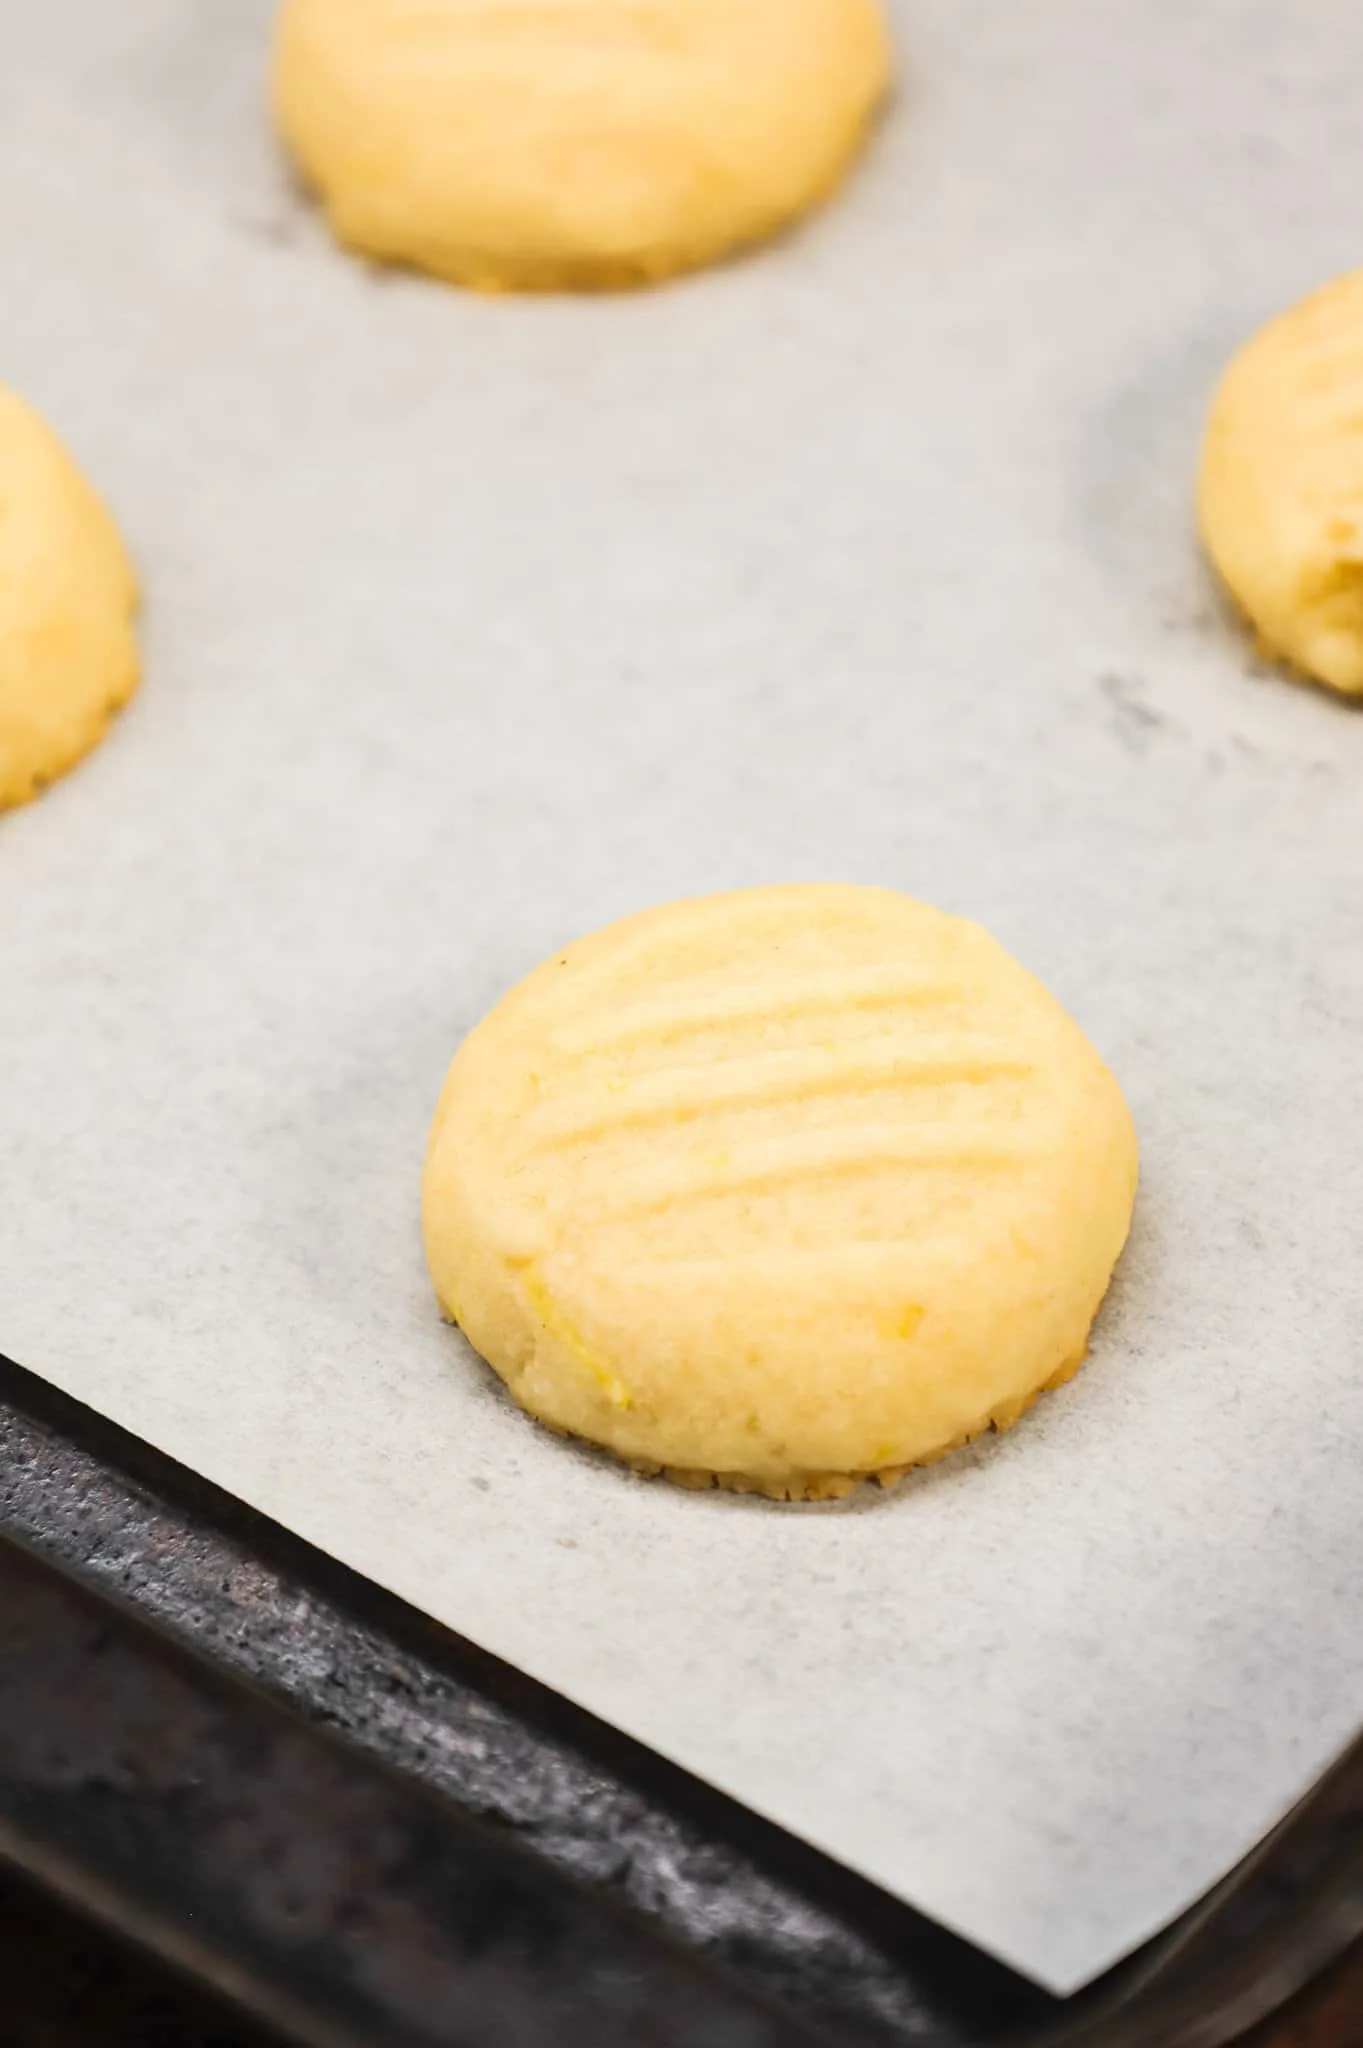 Lemon Shortbread Cookies are a delicious buttery cookie flavoured with lemon zest and lemon extract.